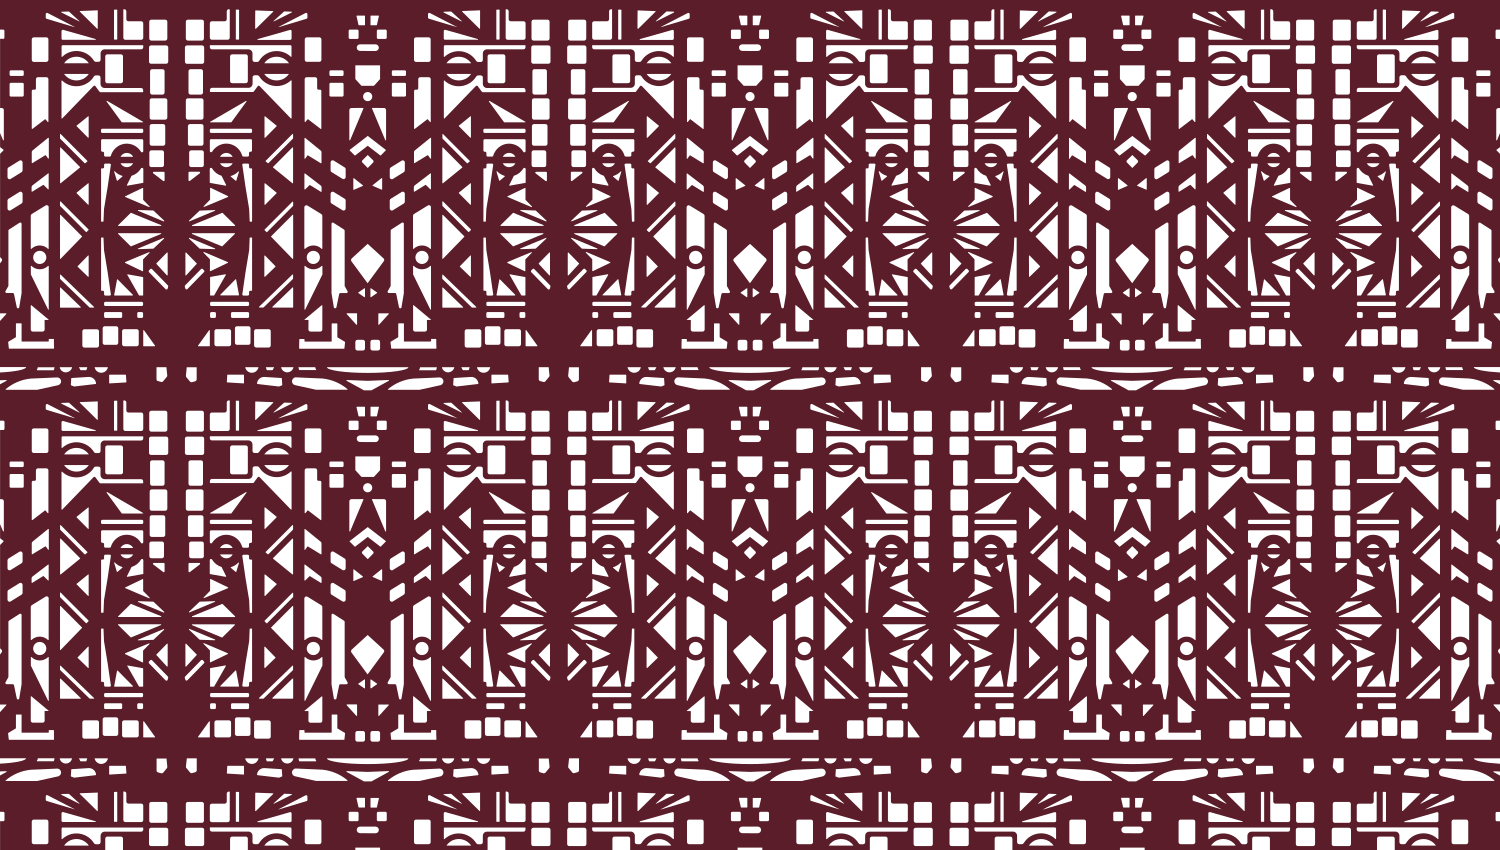 Parasoleil™ Kitty's Pattern© pattern displayed with a burgundy color overlay